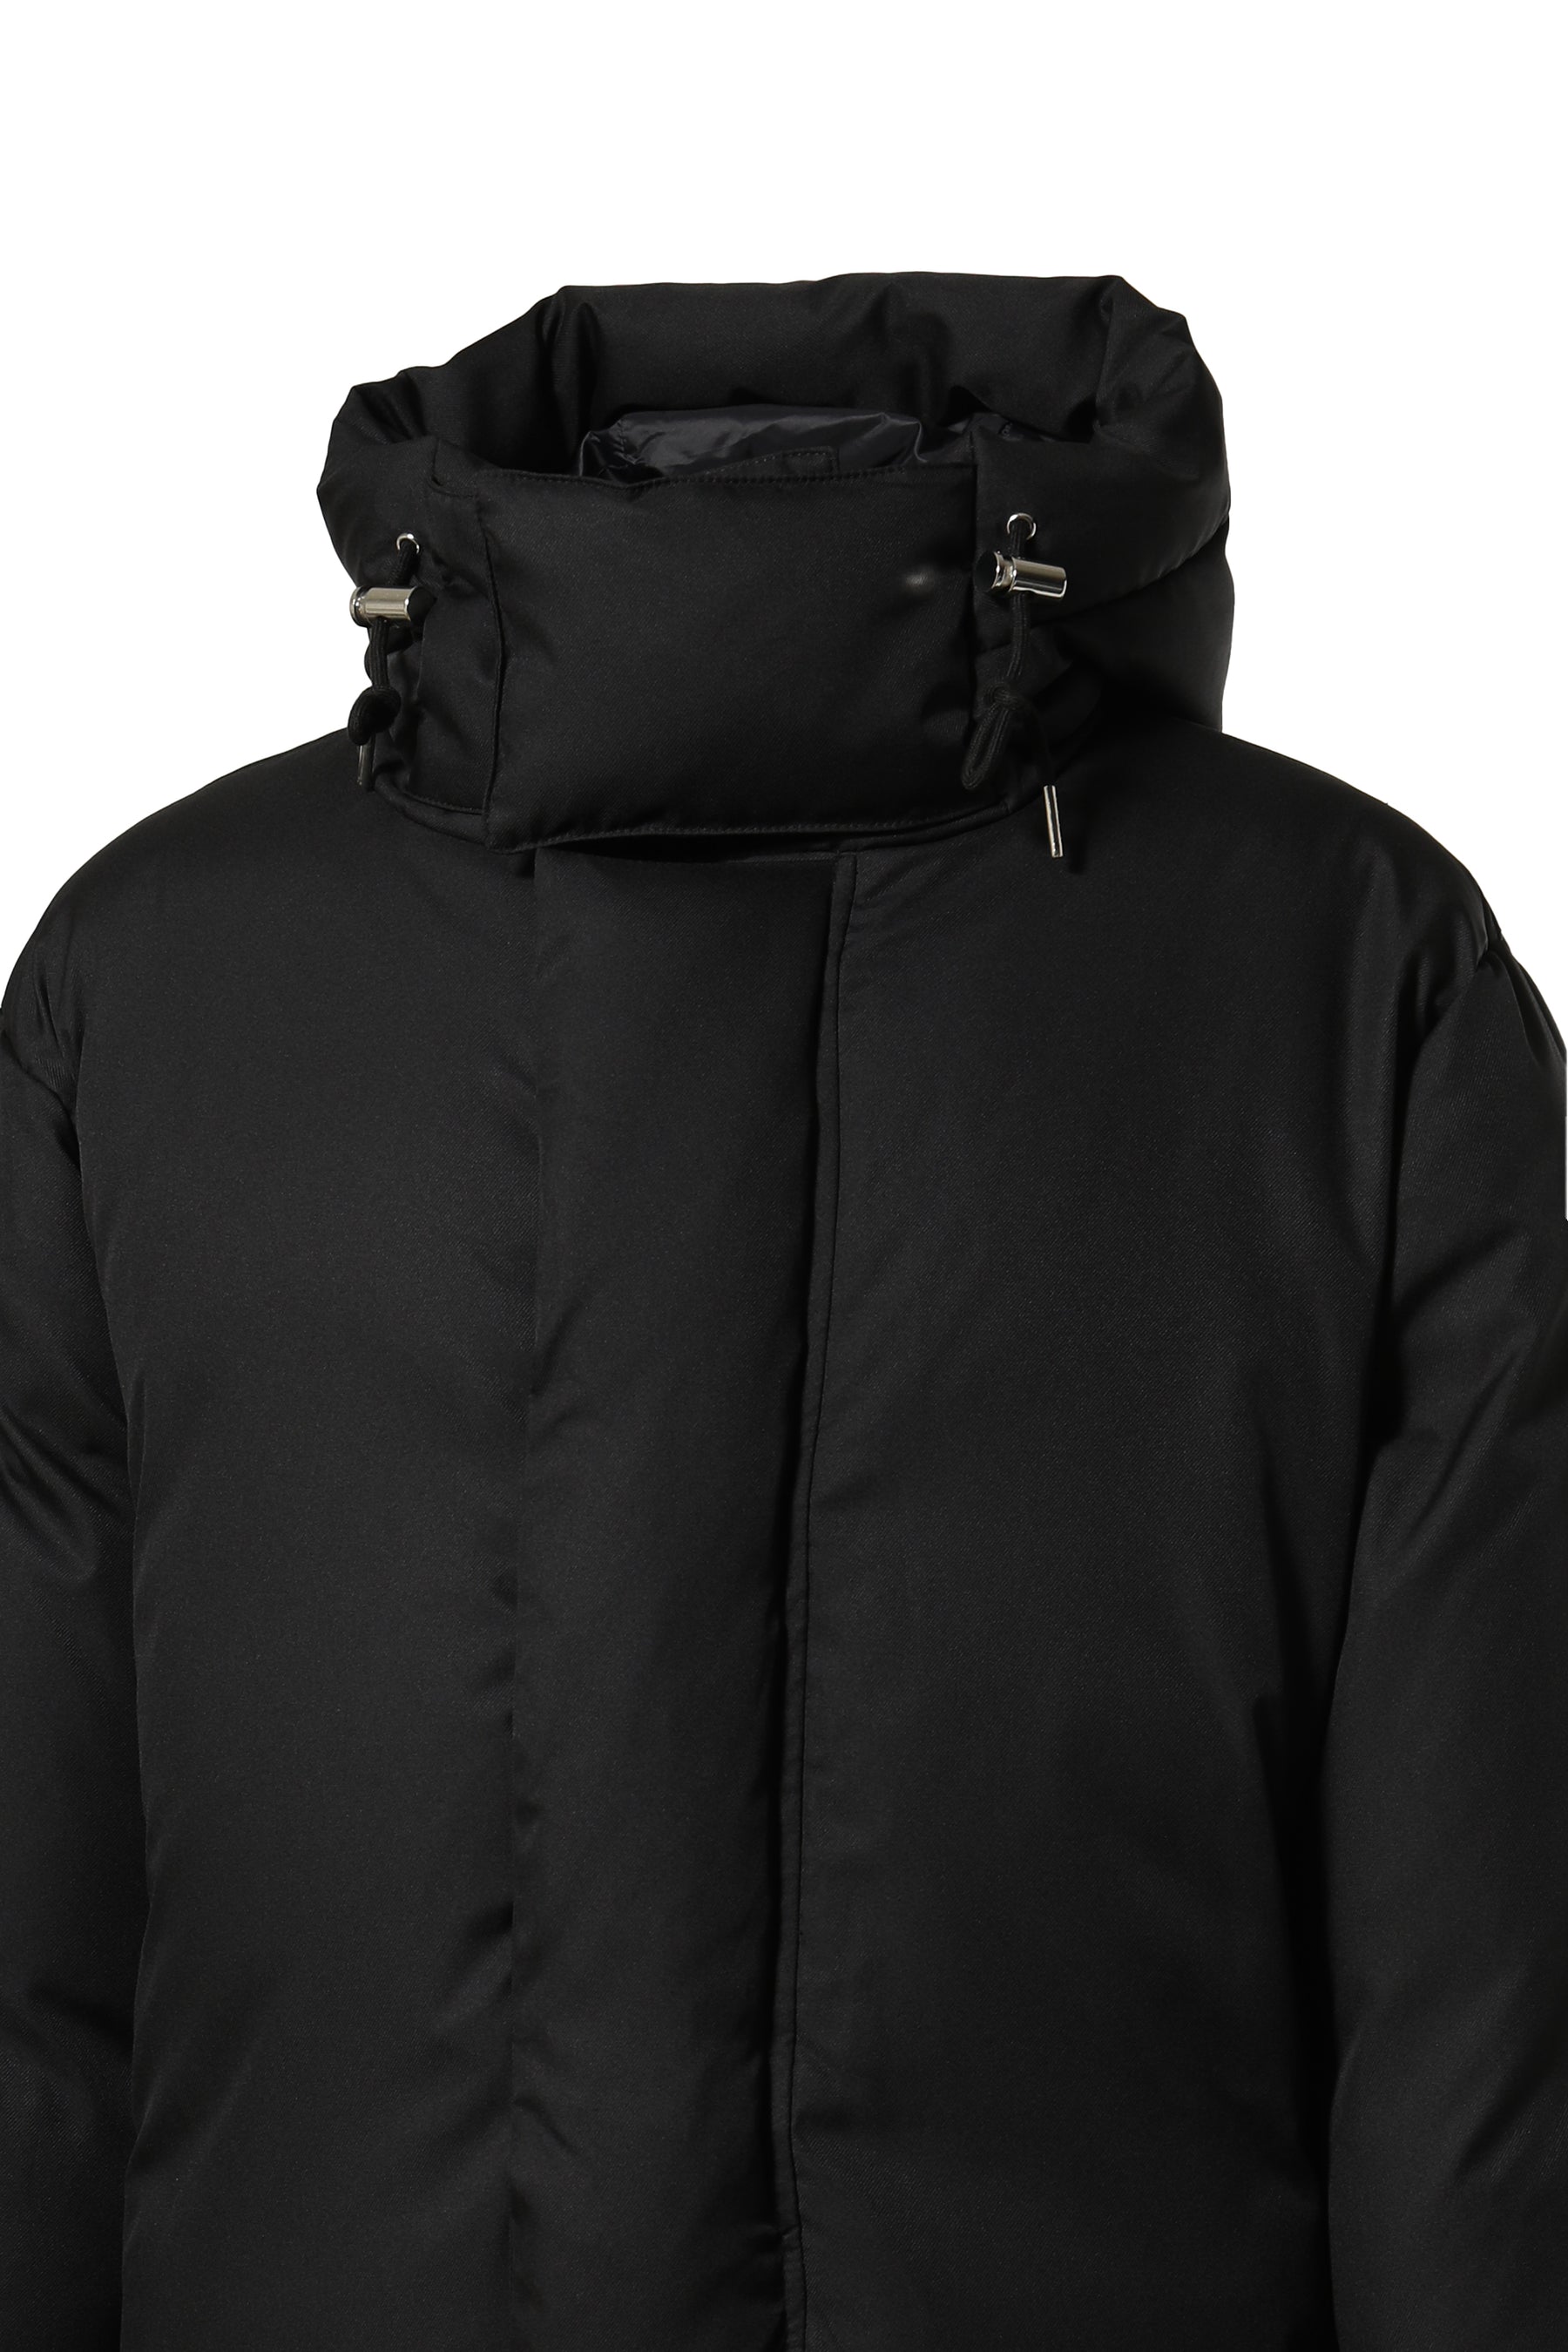 MLVINCE メルヴィンス FW23 LIMONTA DOWN JACKET / BLK -NUBIAN